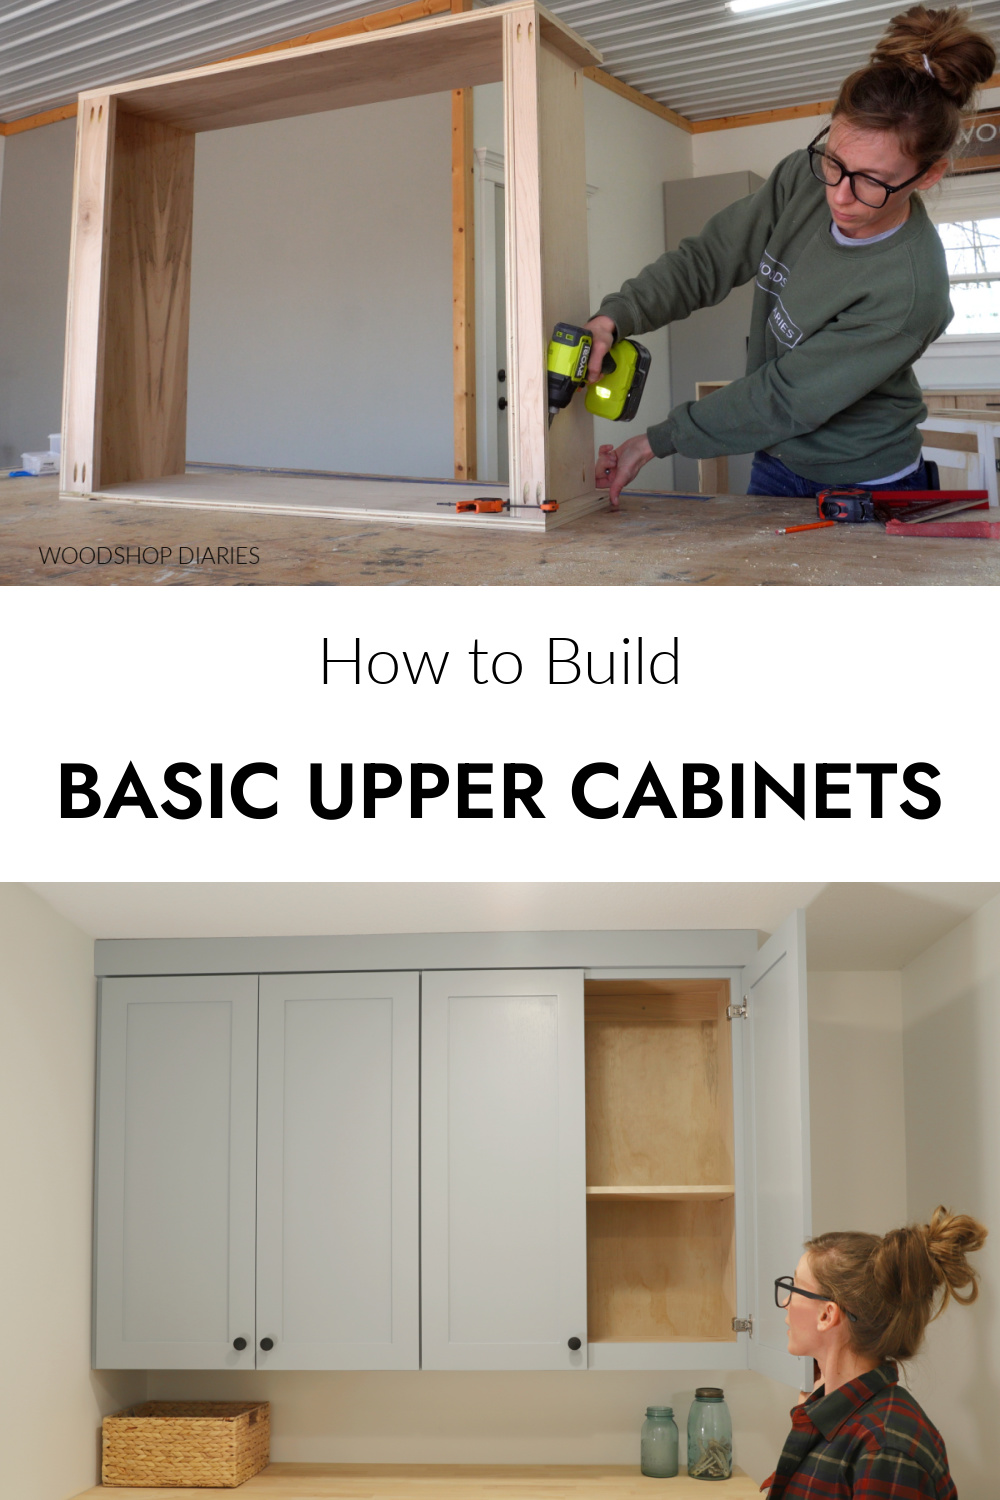 Pinterest collage showing Shara Woodshop Diaries assembling upper cabinet box at top and completed DIY cabinet boxes at bottom with text "how to build basic upper cabinets"